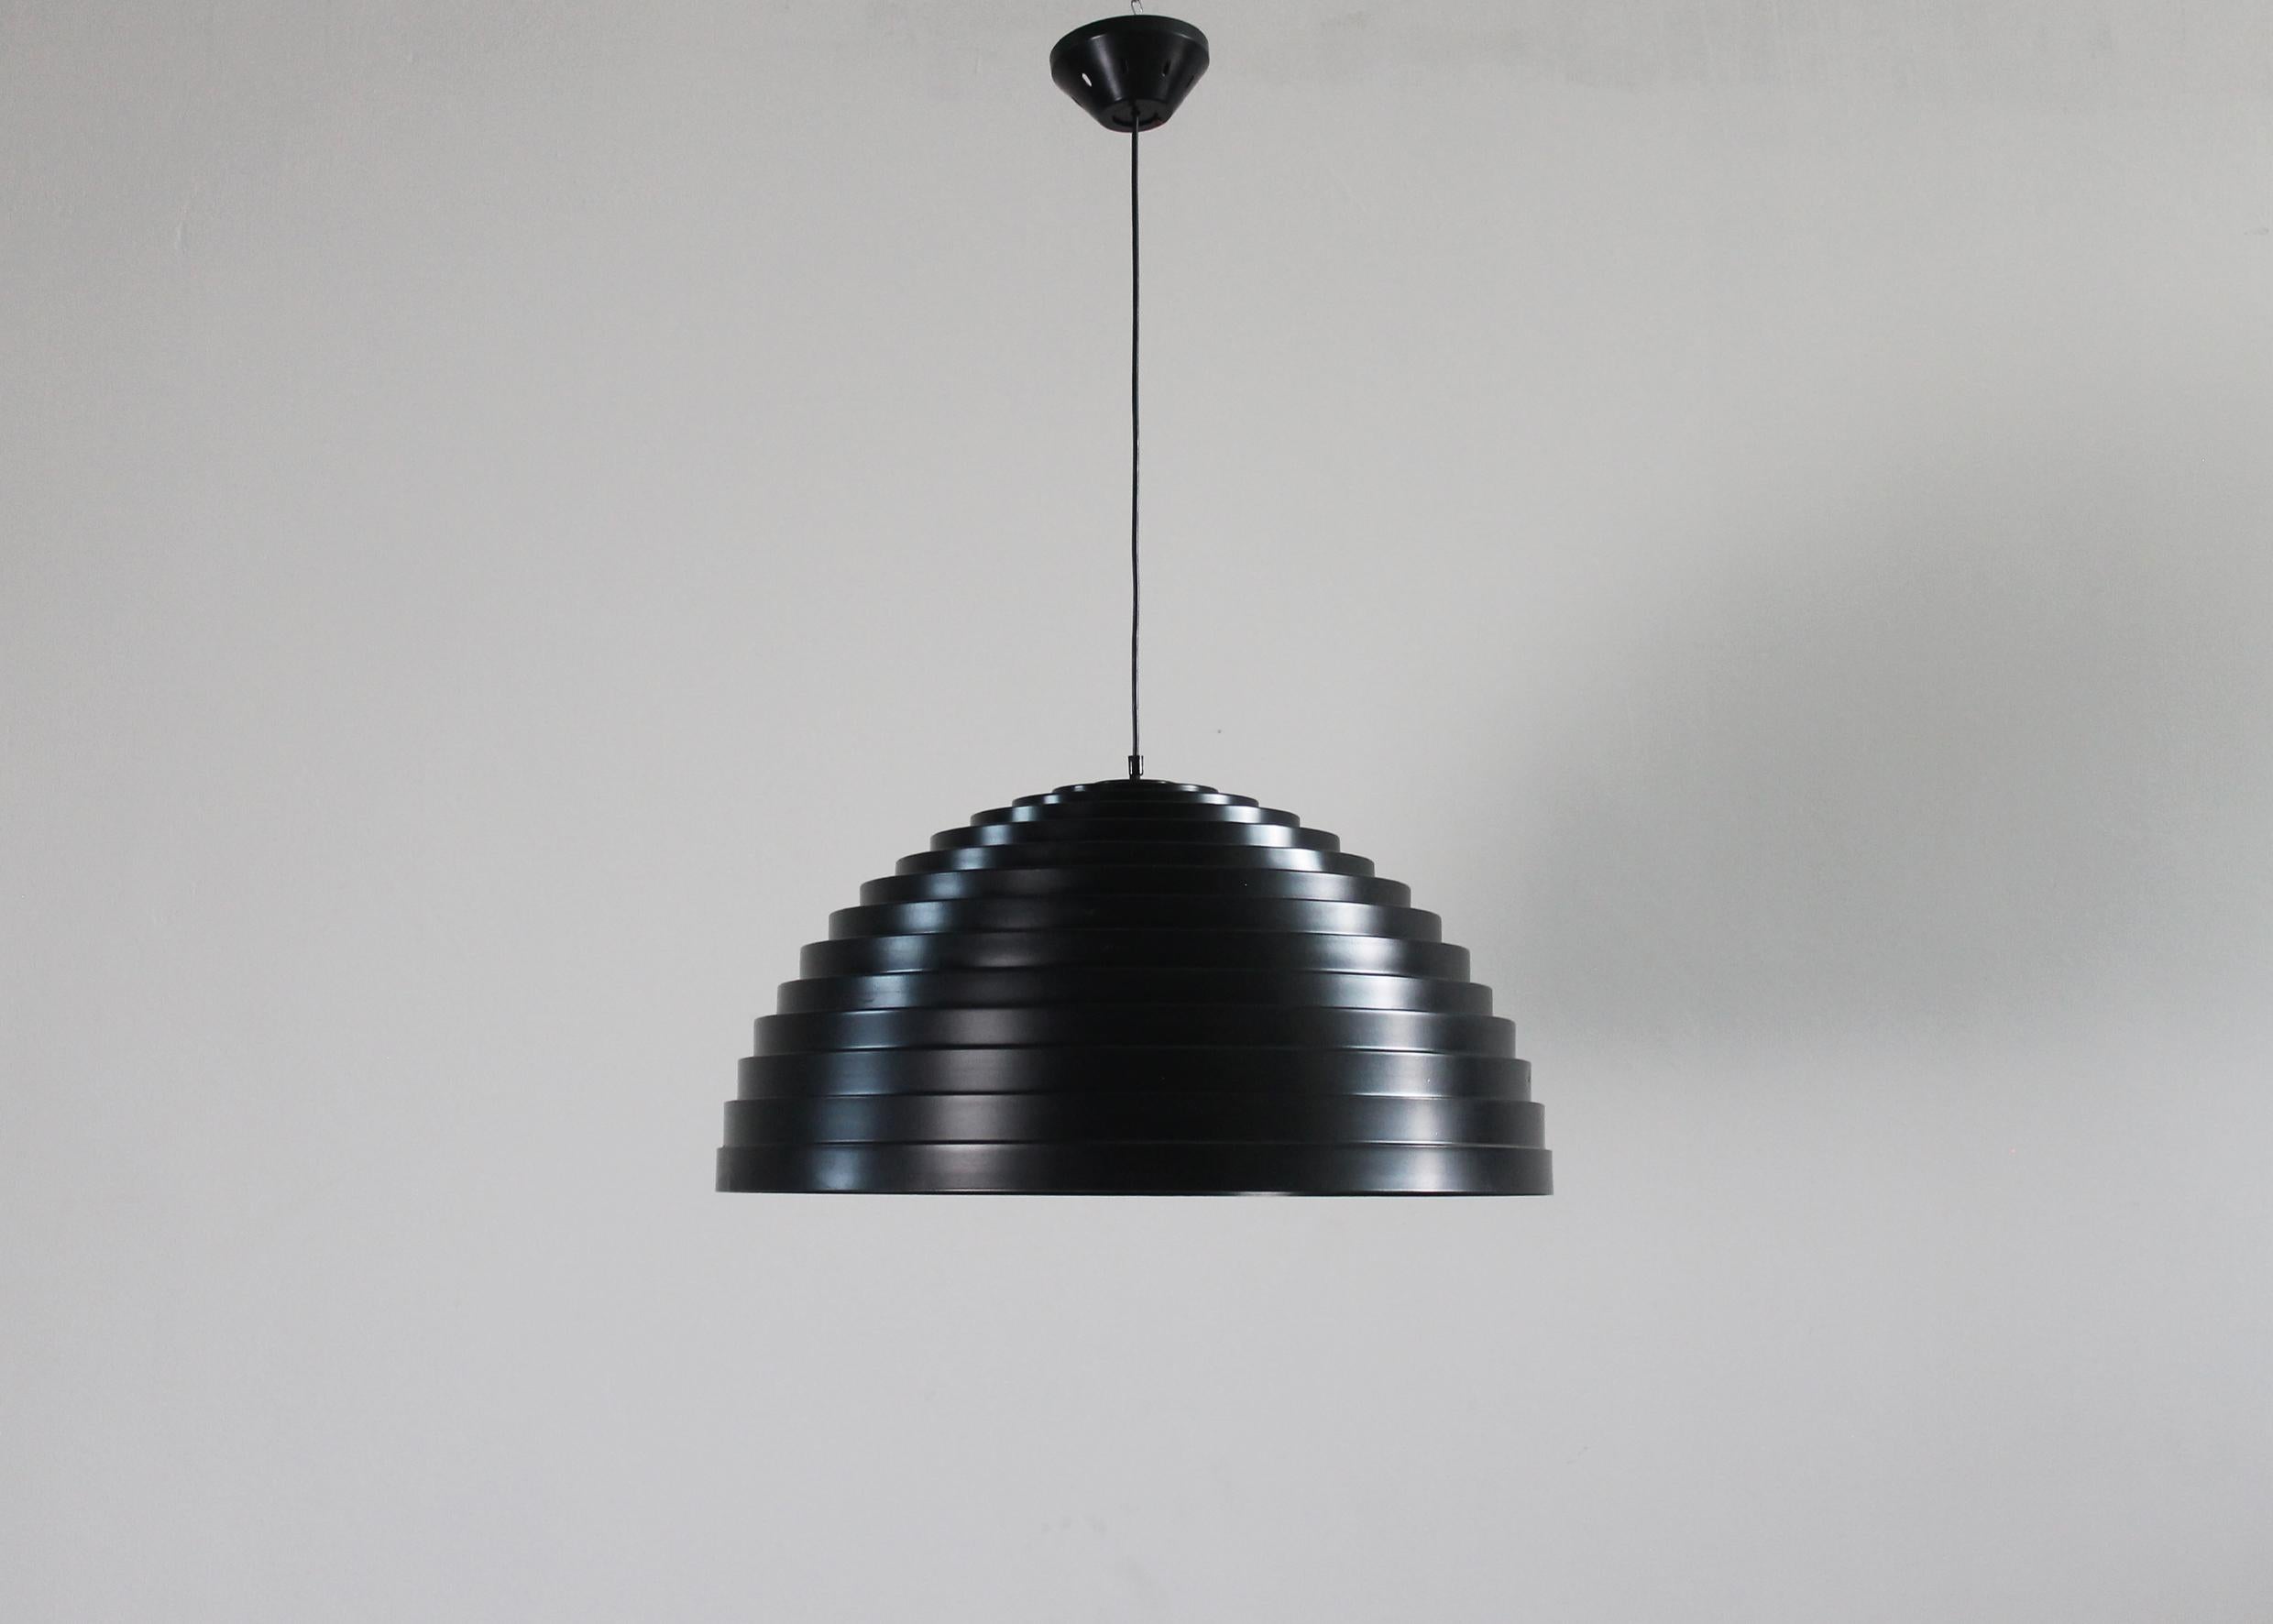 A rare ceiling lamp or chandelier (model Step) with a semisphere lampshade in black lacquered aluminum, it was designed by Elio Martinelli and produced by the Italian company, Martinelli Luce during the 1970s. 

The concentric shapes repeated in a